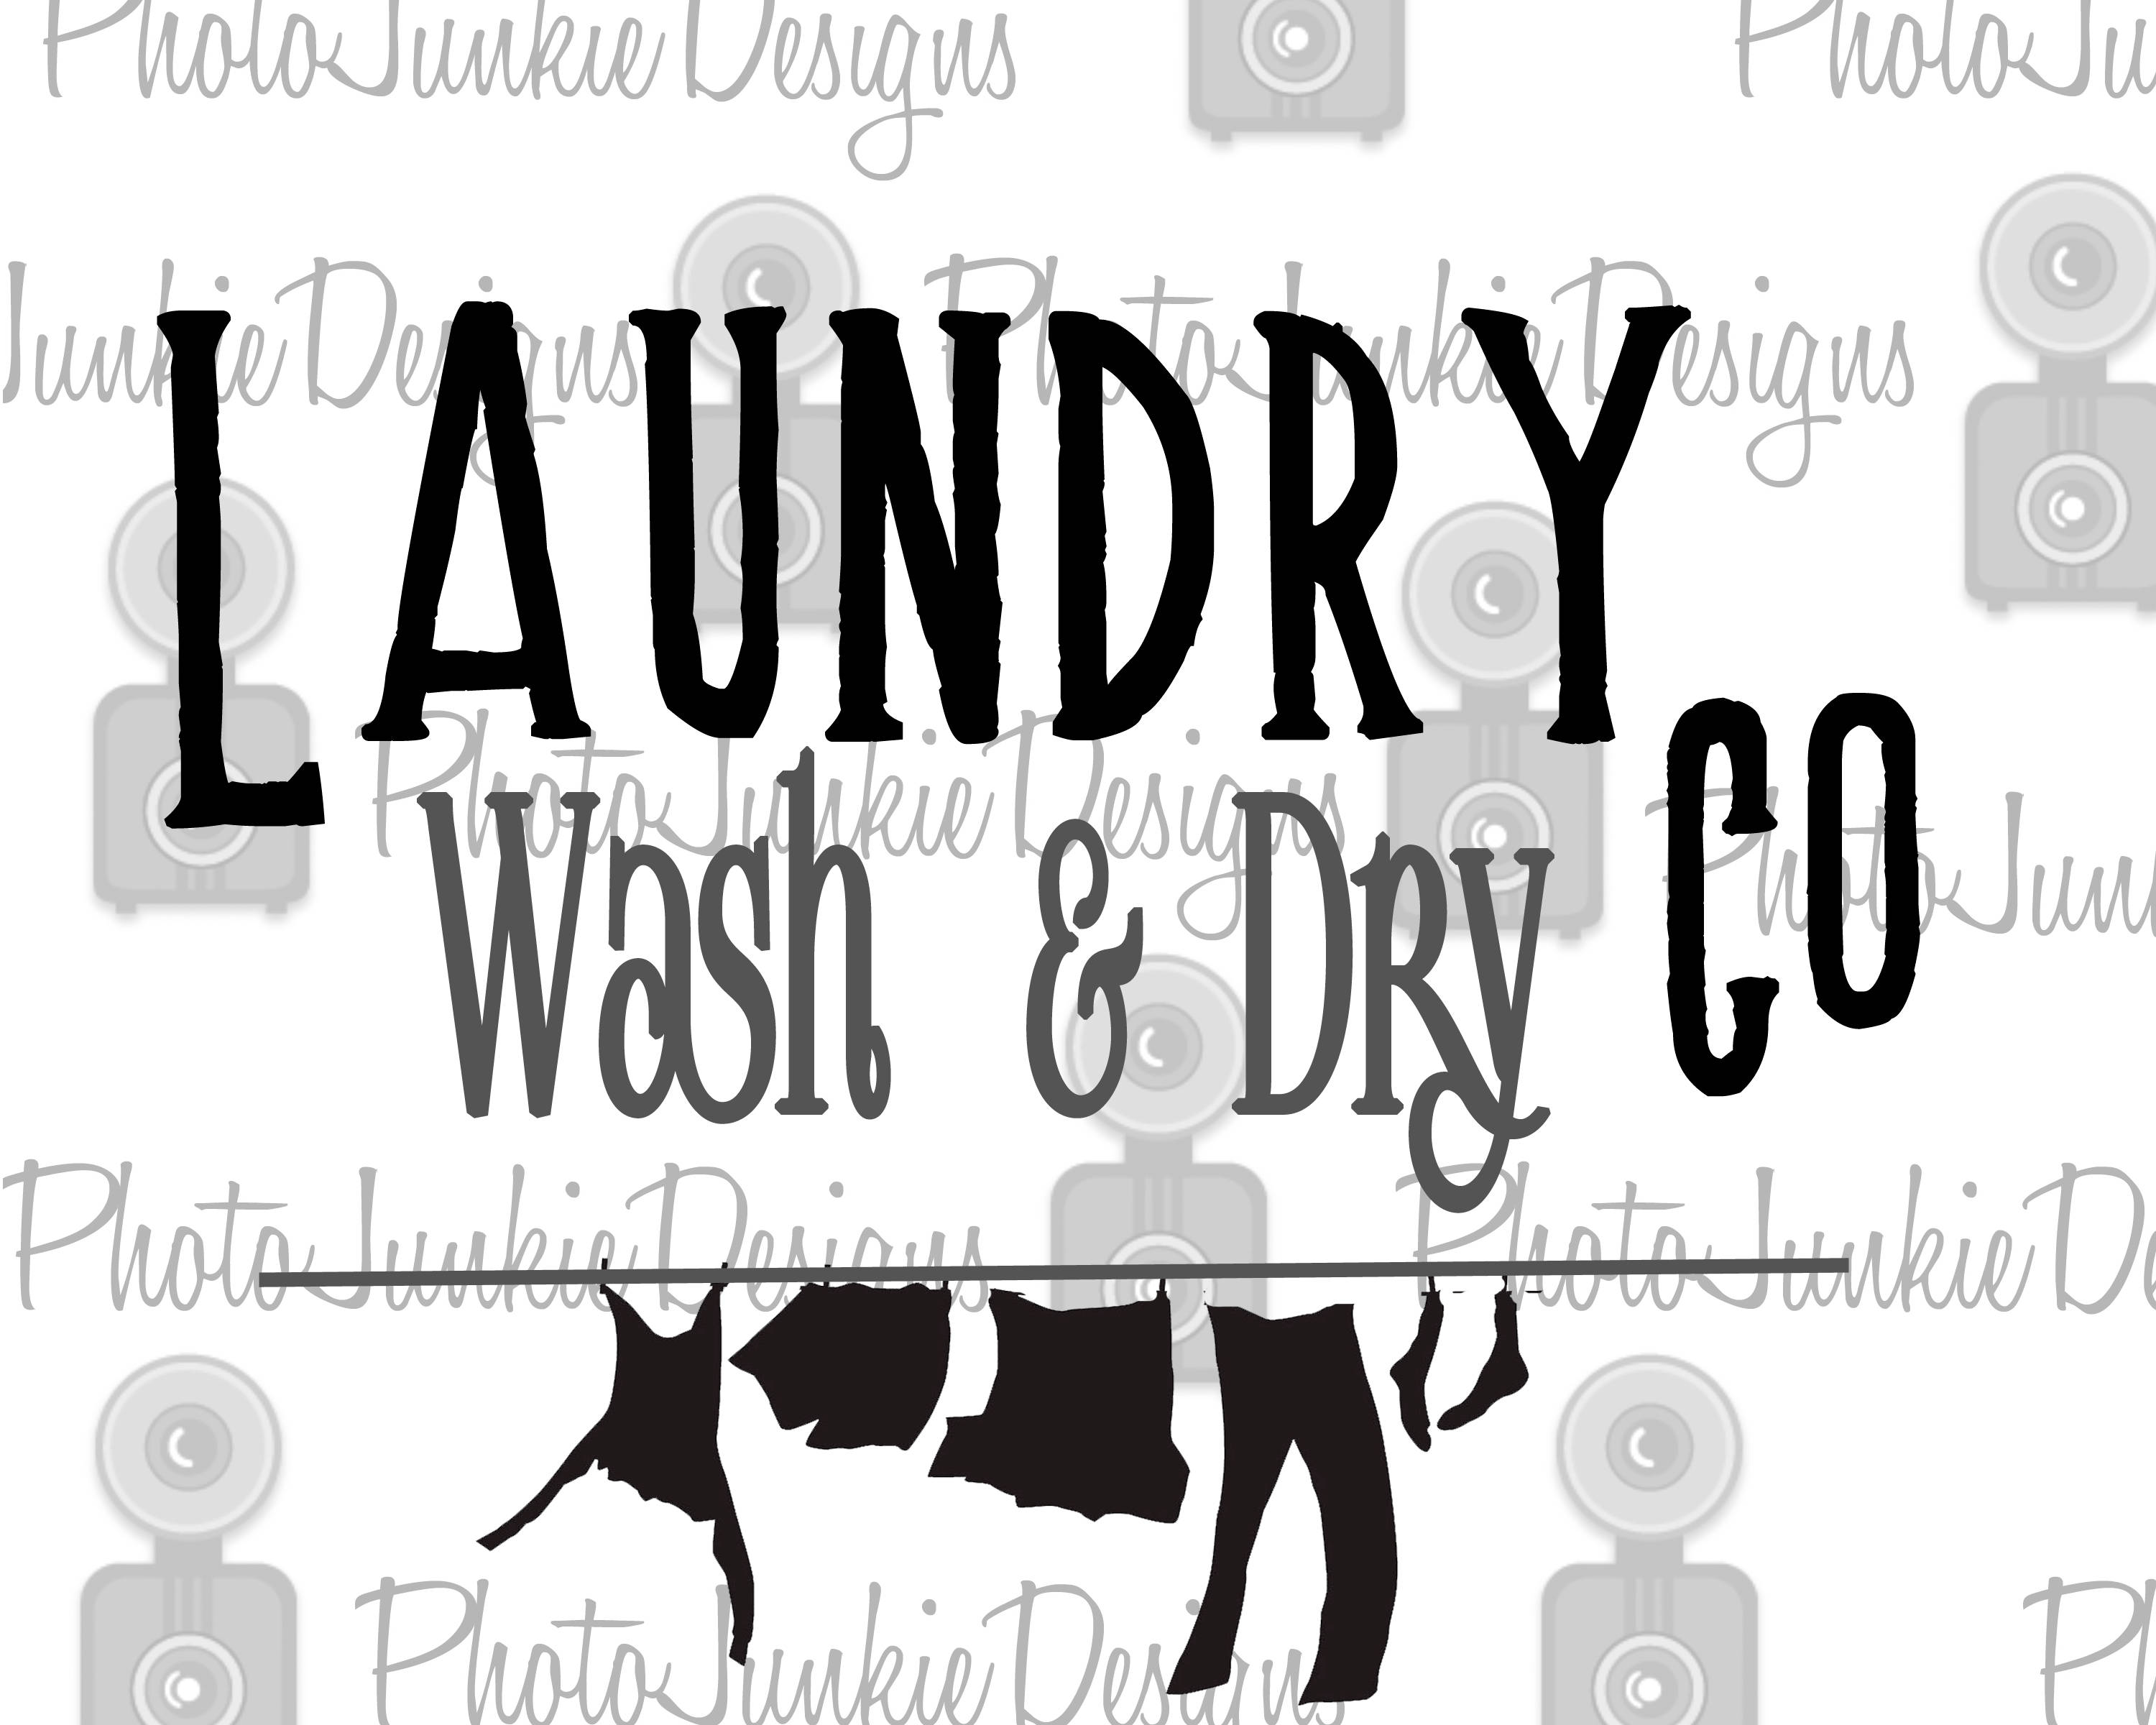 Download SVG Cutting Laundry Co SVG PNG and Jpeg files